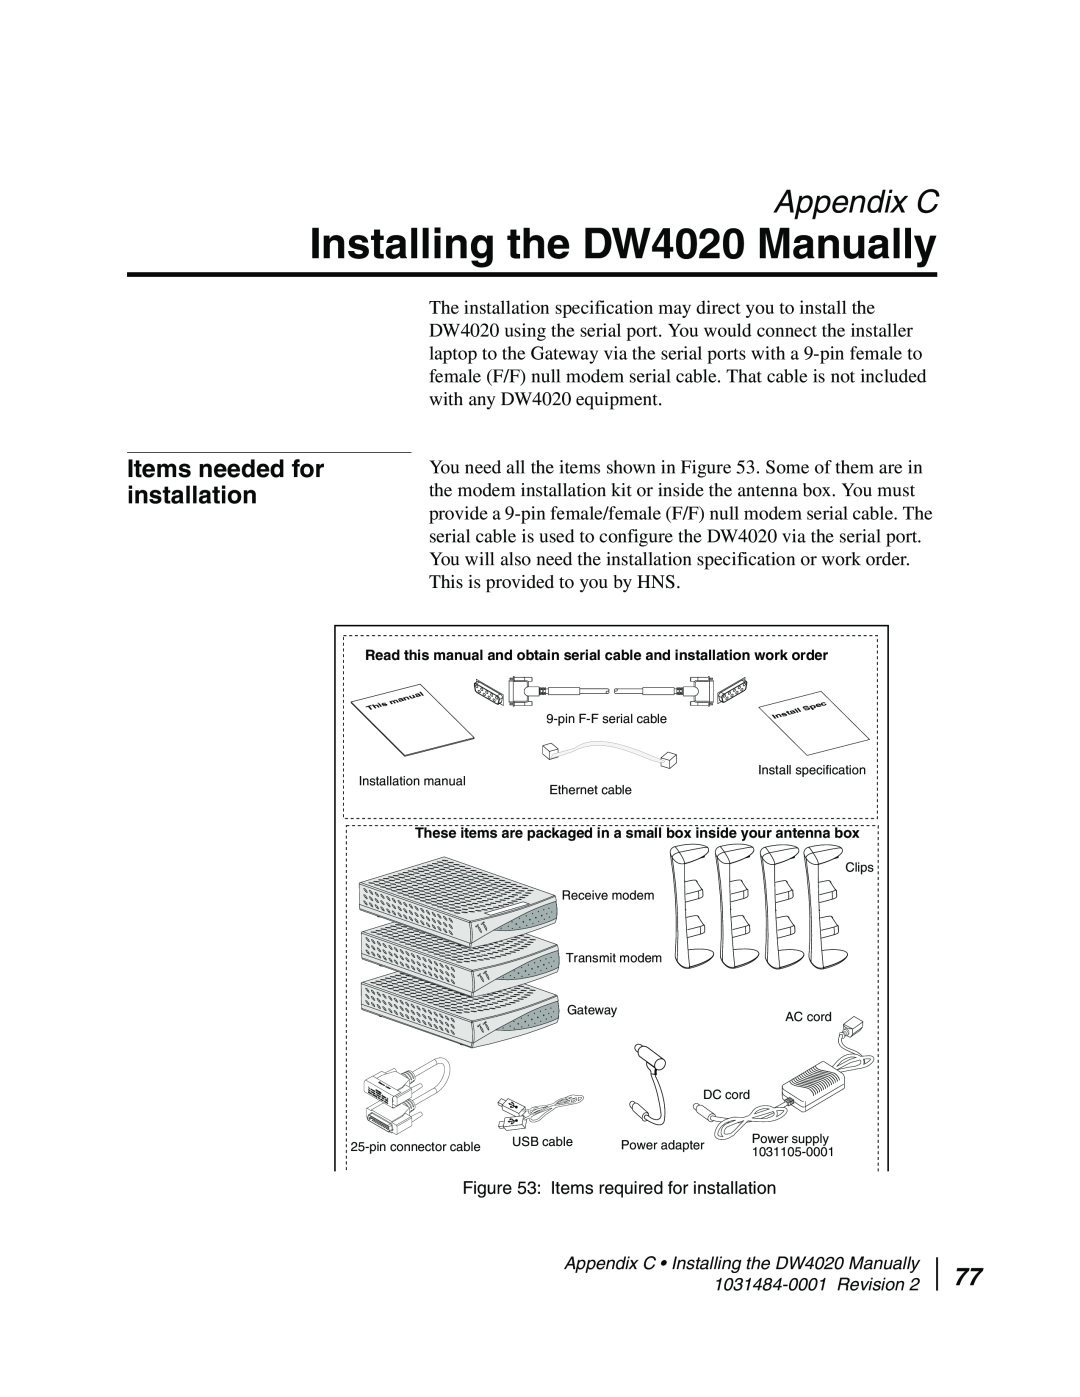 Hughes manual Installing the DW4020 Manually, Appendix C, Items needed for installation 